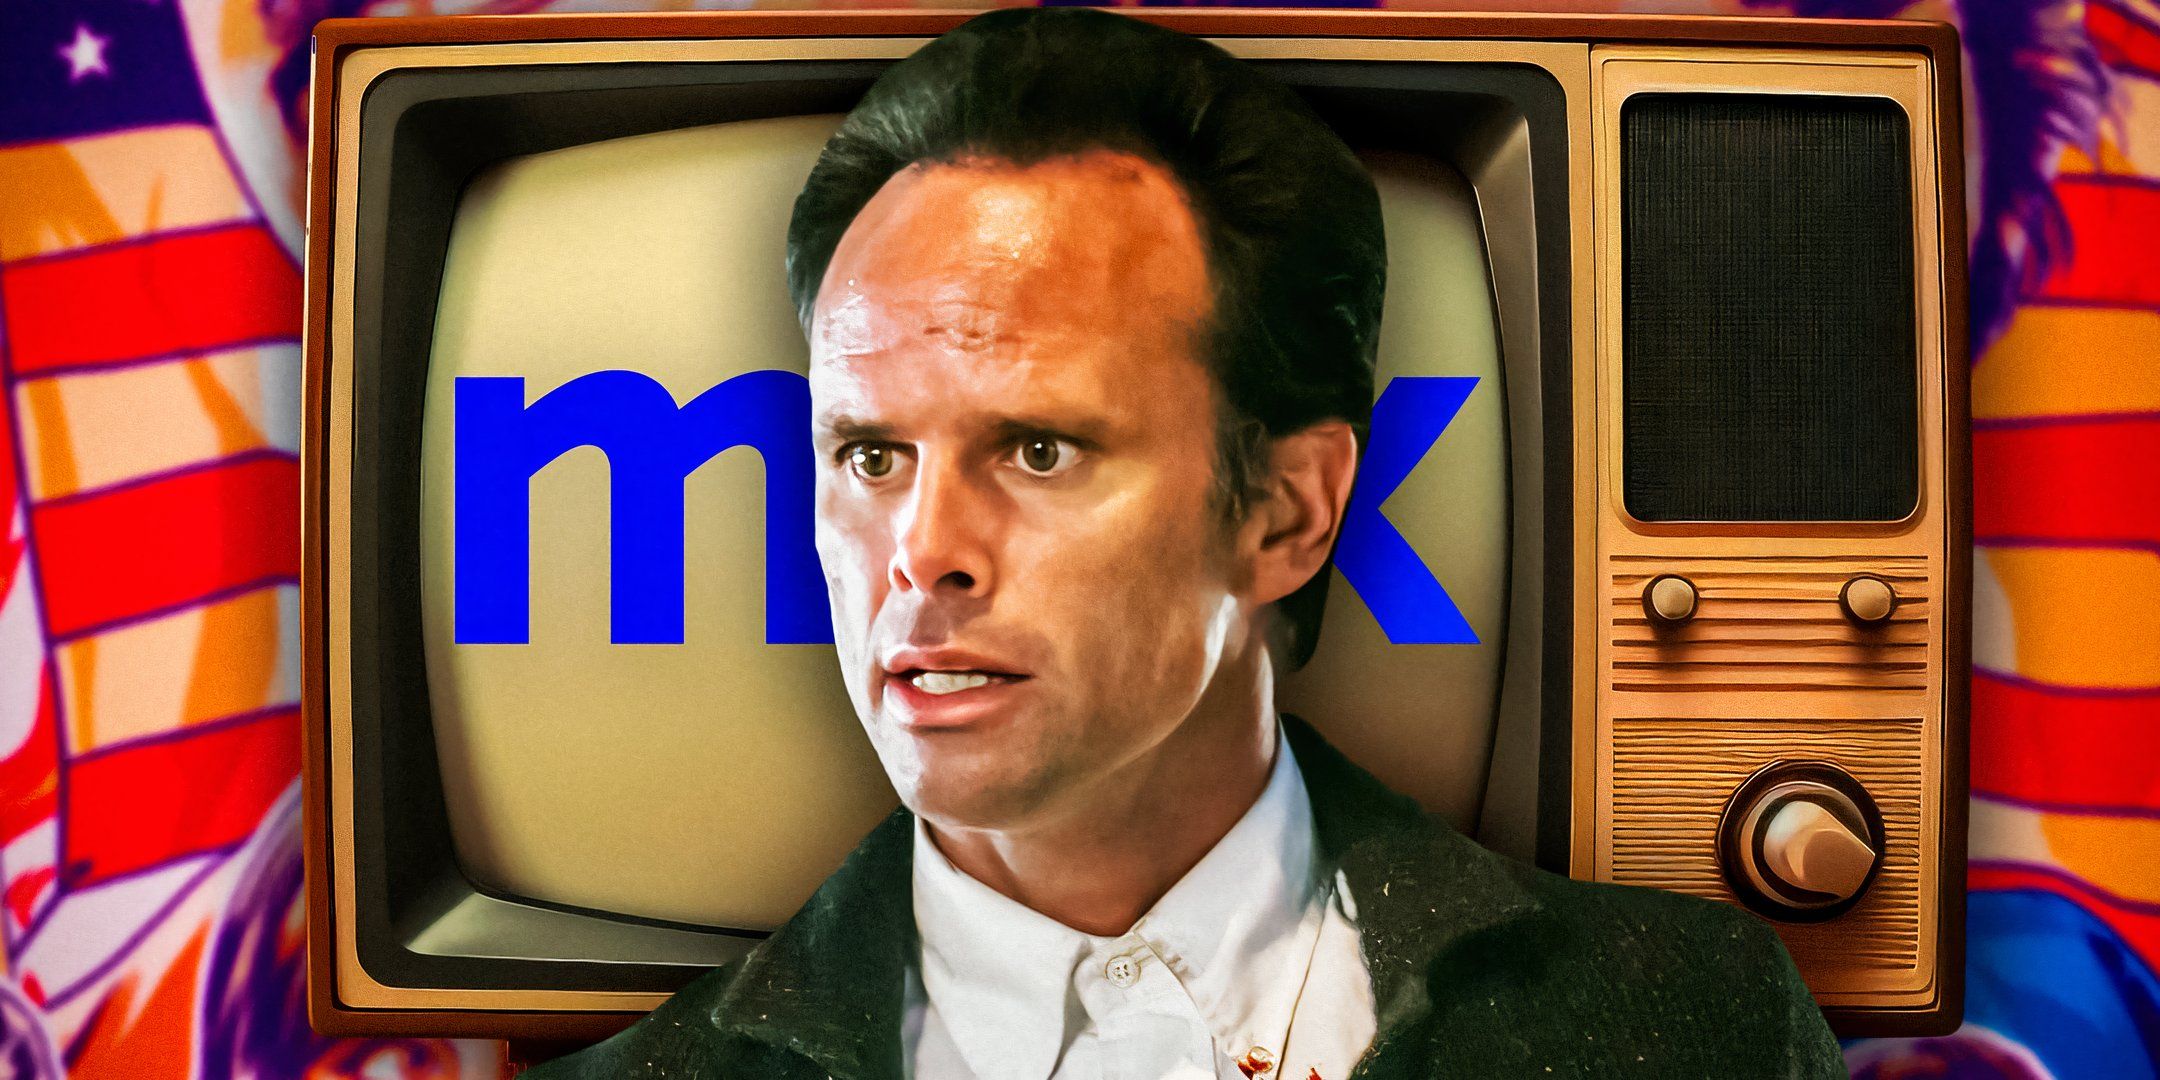 Walton Goggins as Boyd Crowder from Justified in front of a CRT TV with the Max logo on it